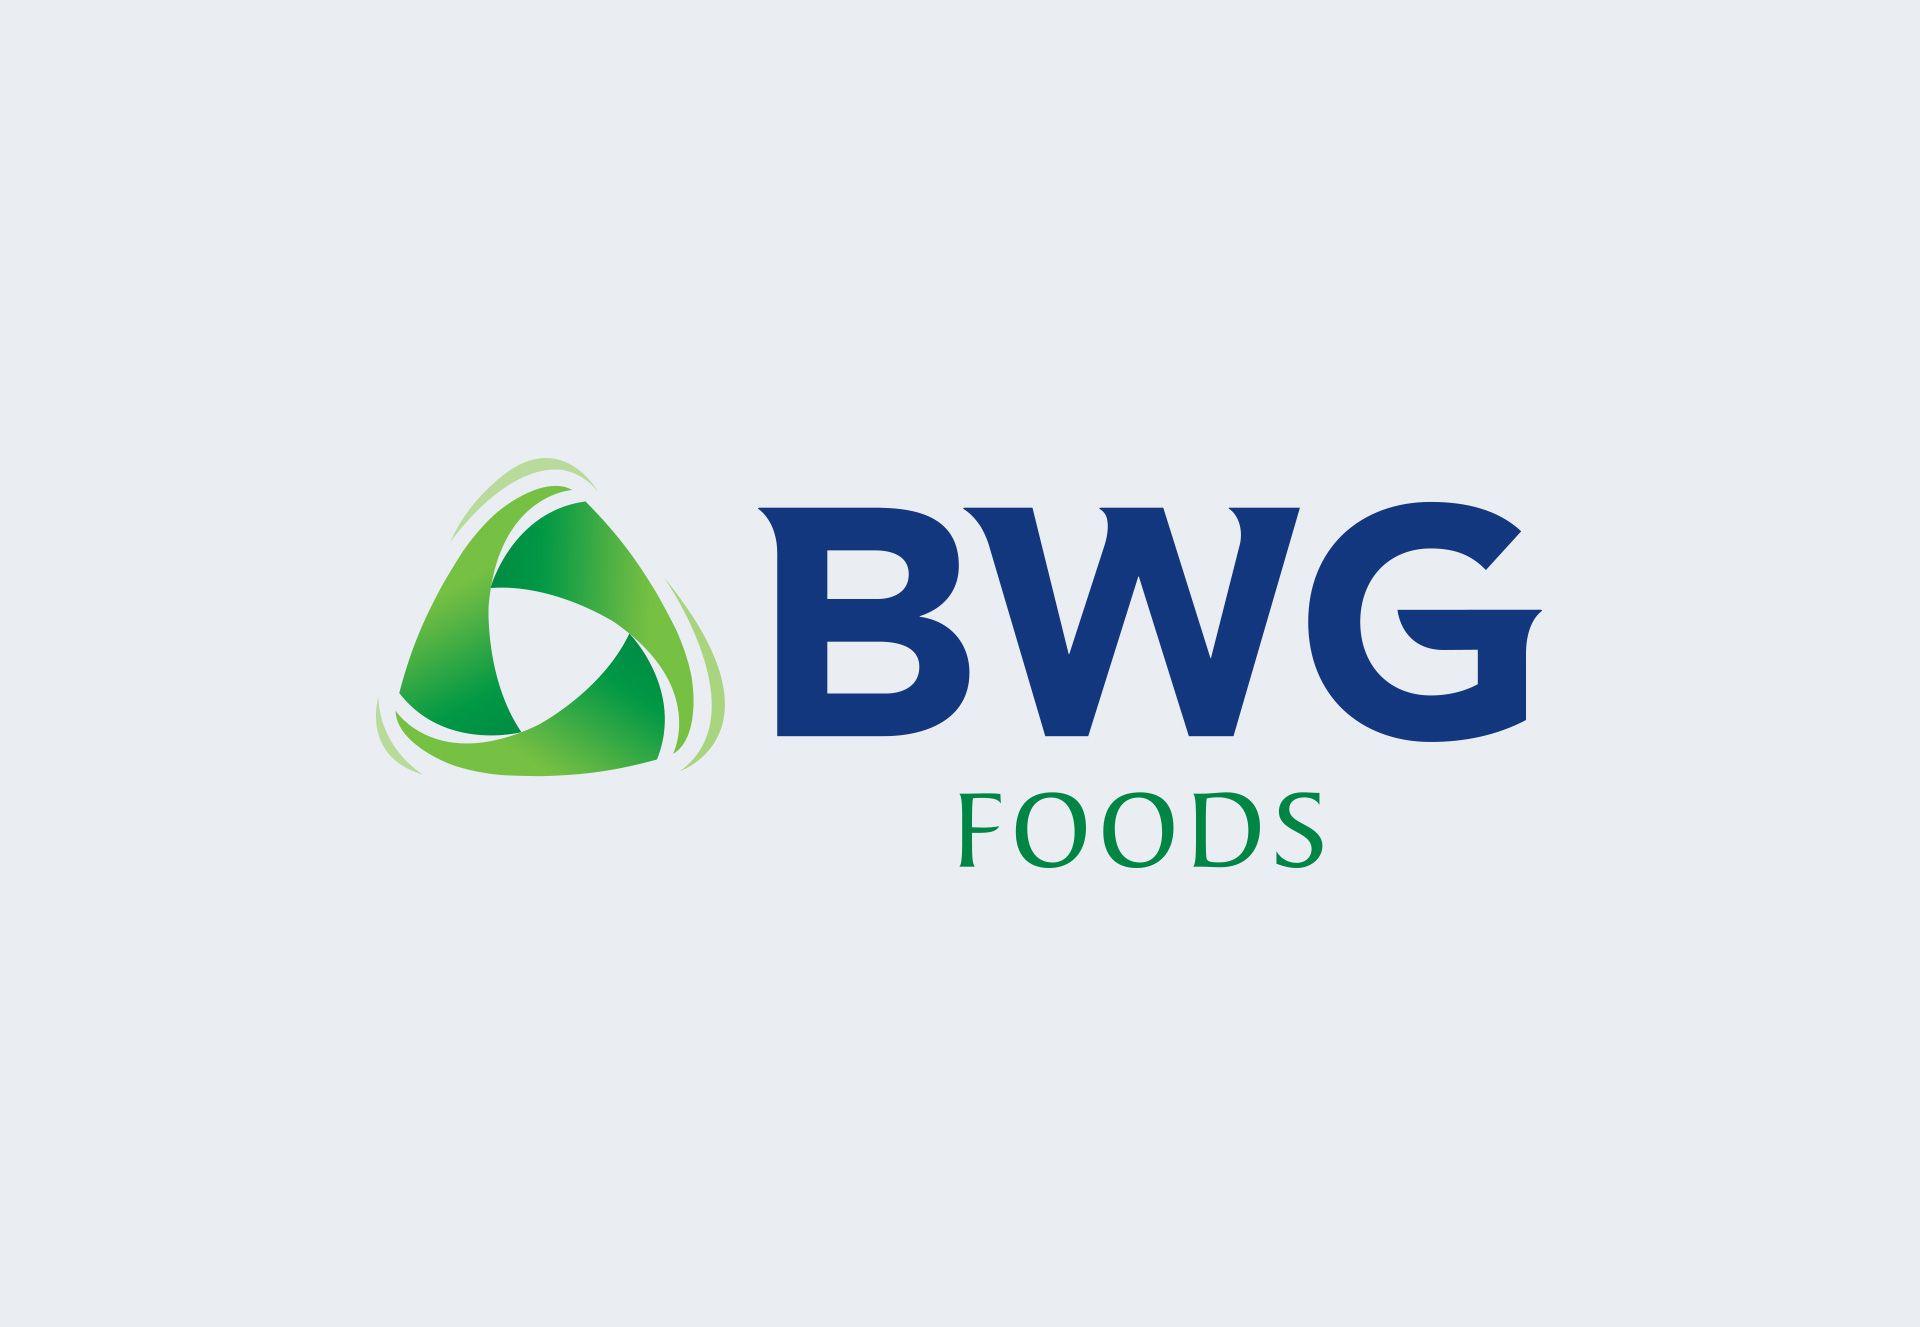 BWG Logo - BWG Group acquired by Pernod Ricard – www.bwg.ie